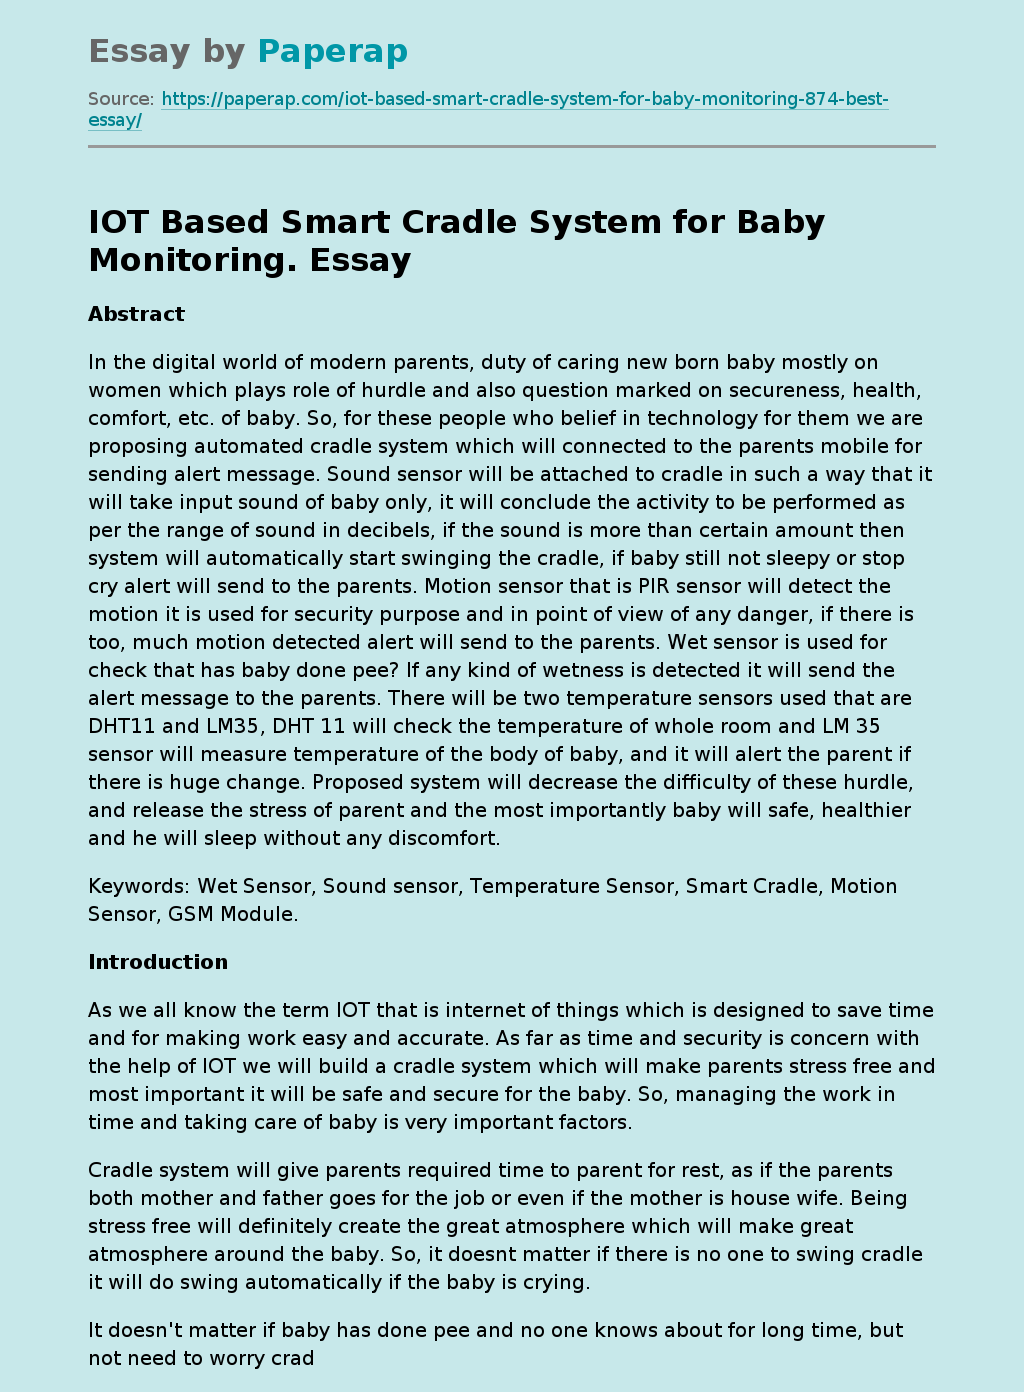 IOT Based Smart Cradle System for Baby Monitoring.